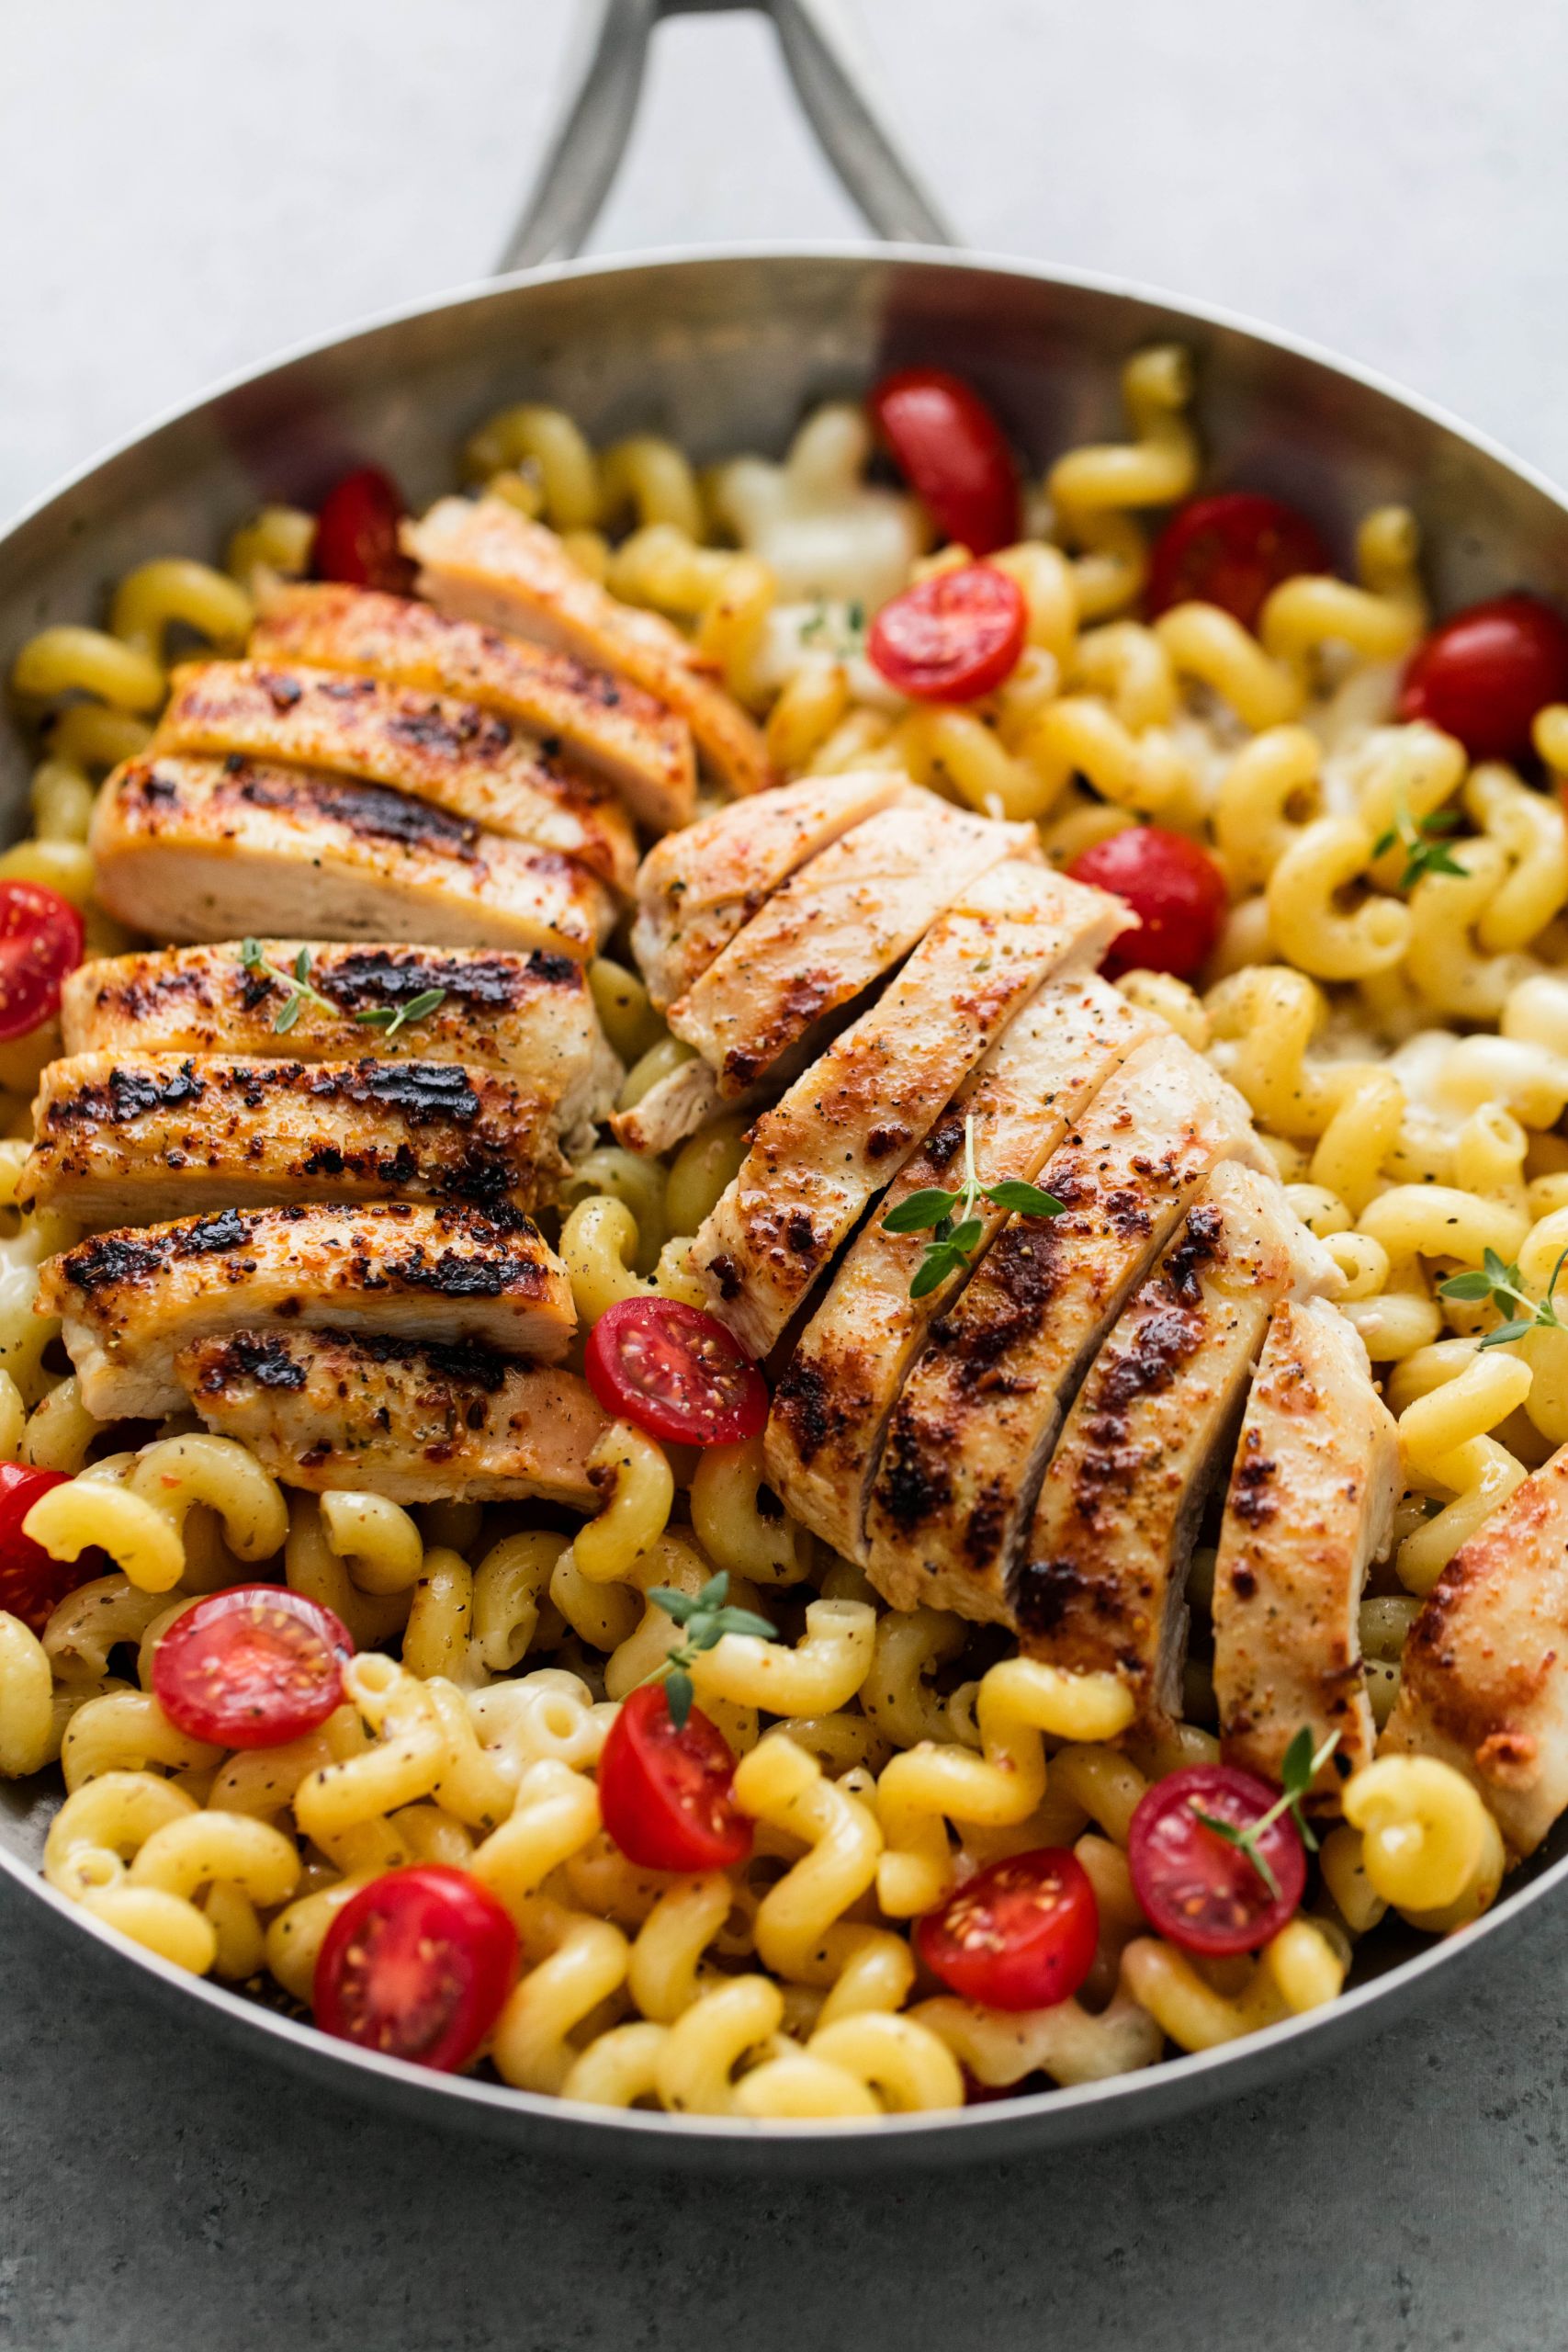 Quick Dinners With Chicken
 100 Easy Chicken Dinner Recipes — Simple Ideas for Quick